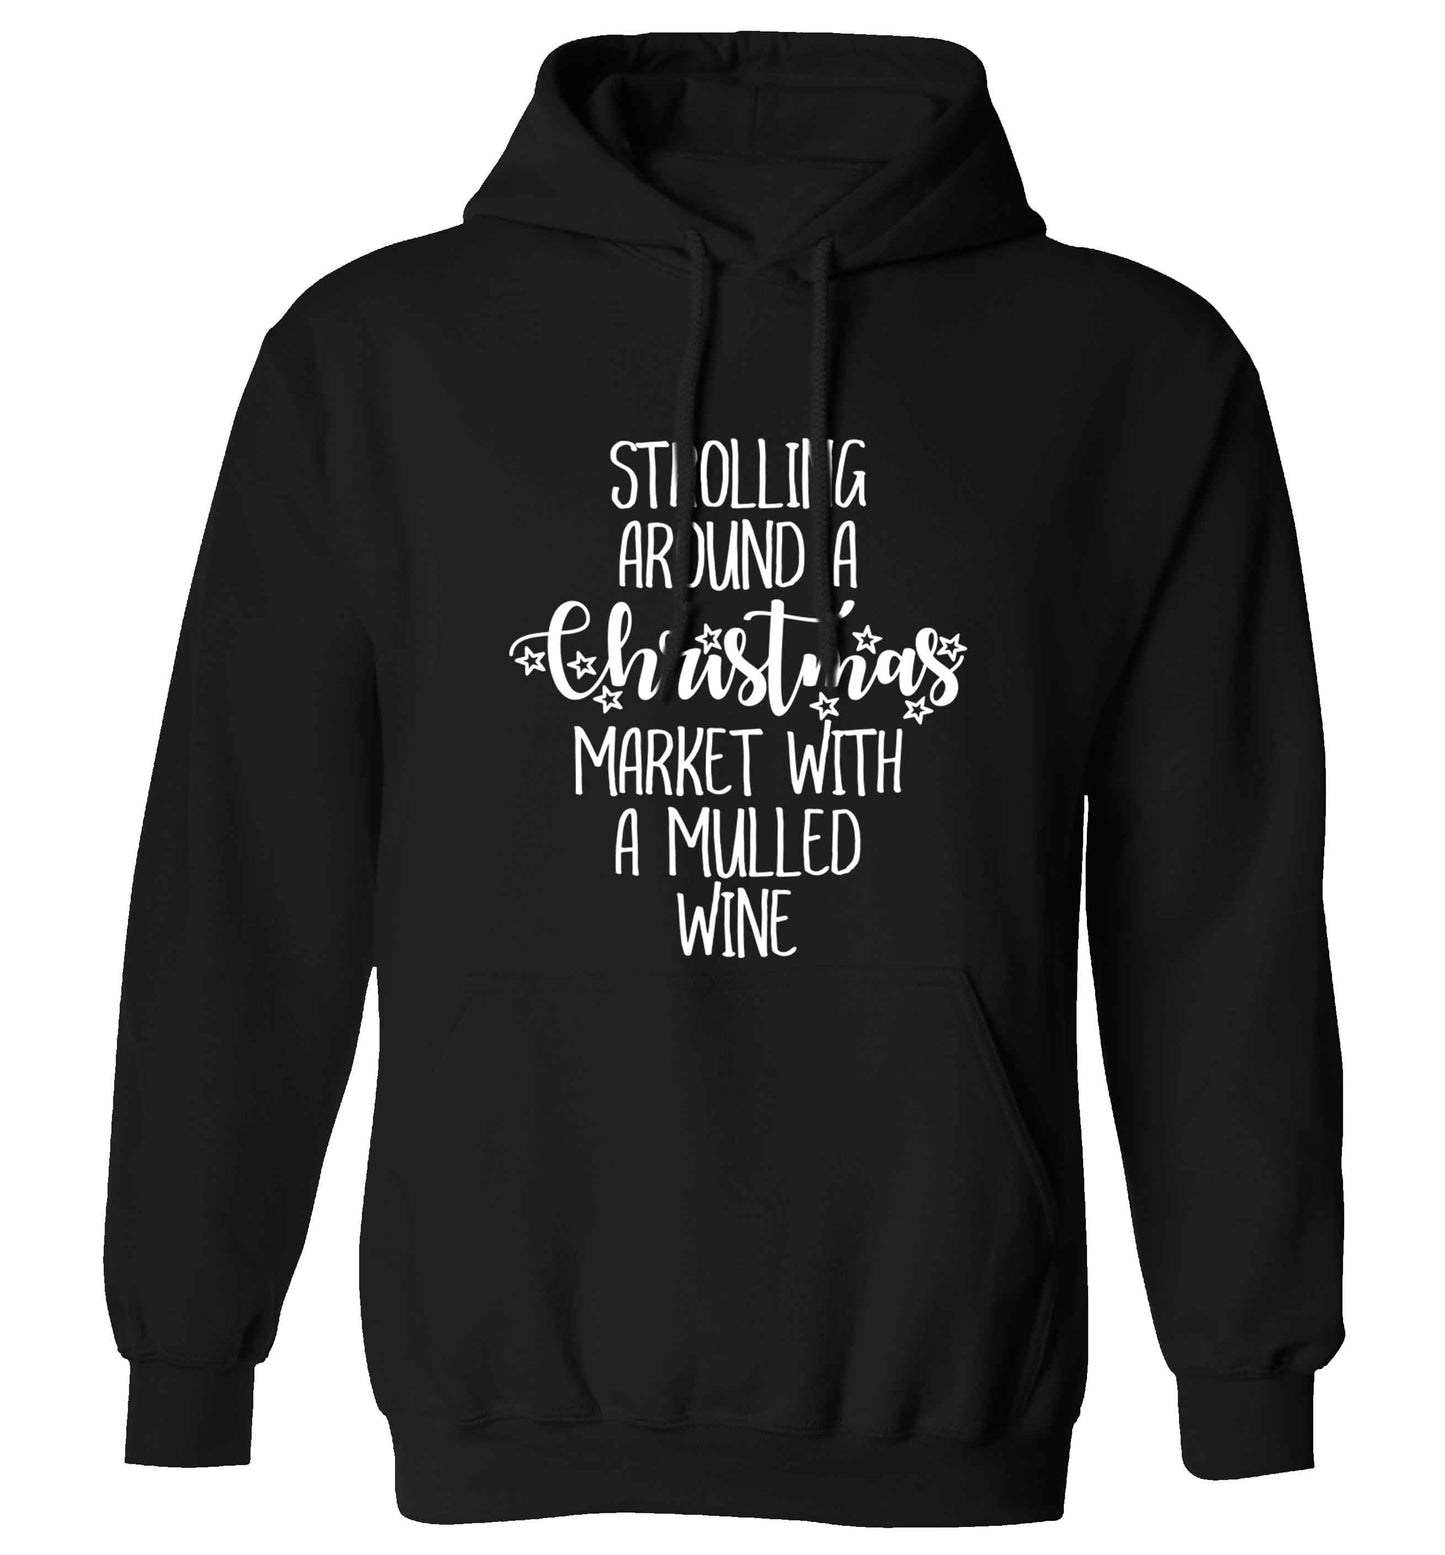 Strolling around a Christmas market with mulled wine adults unisex black hoodie 2XL